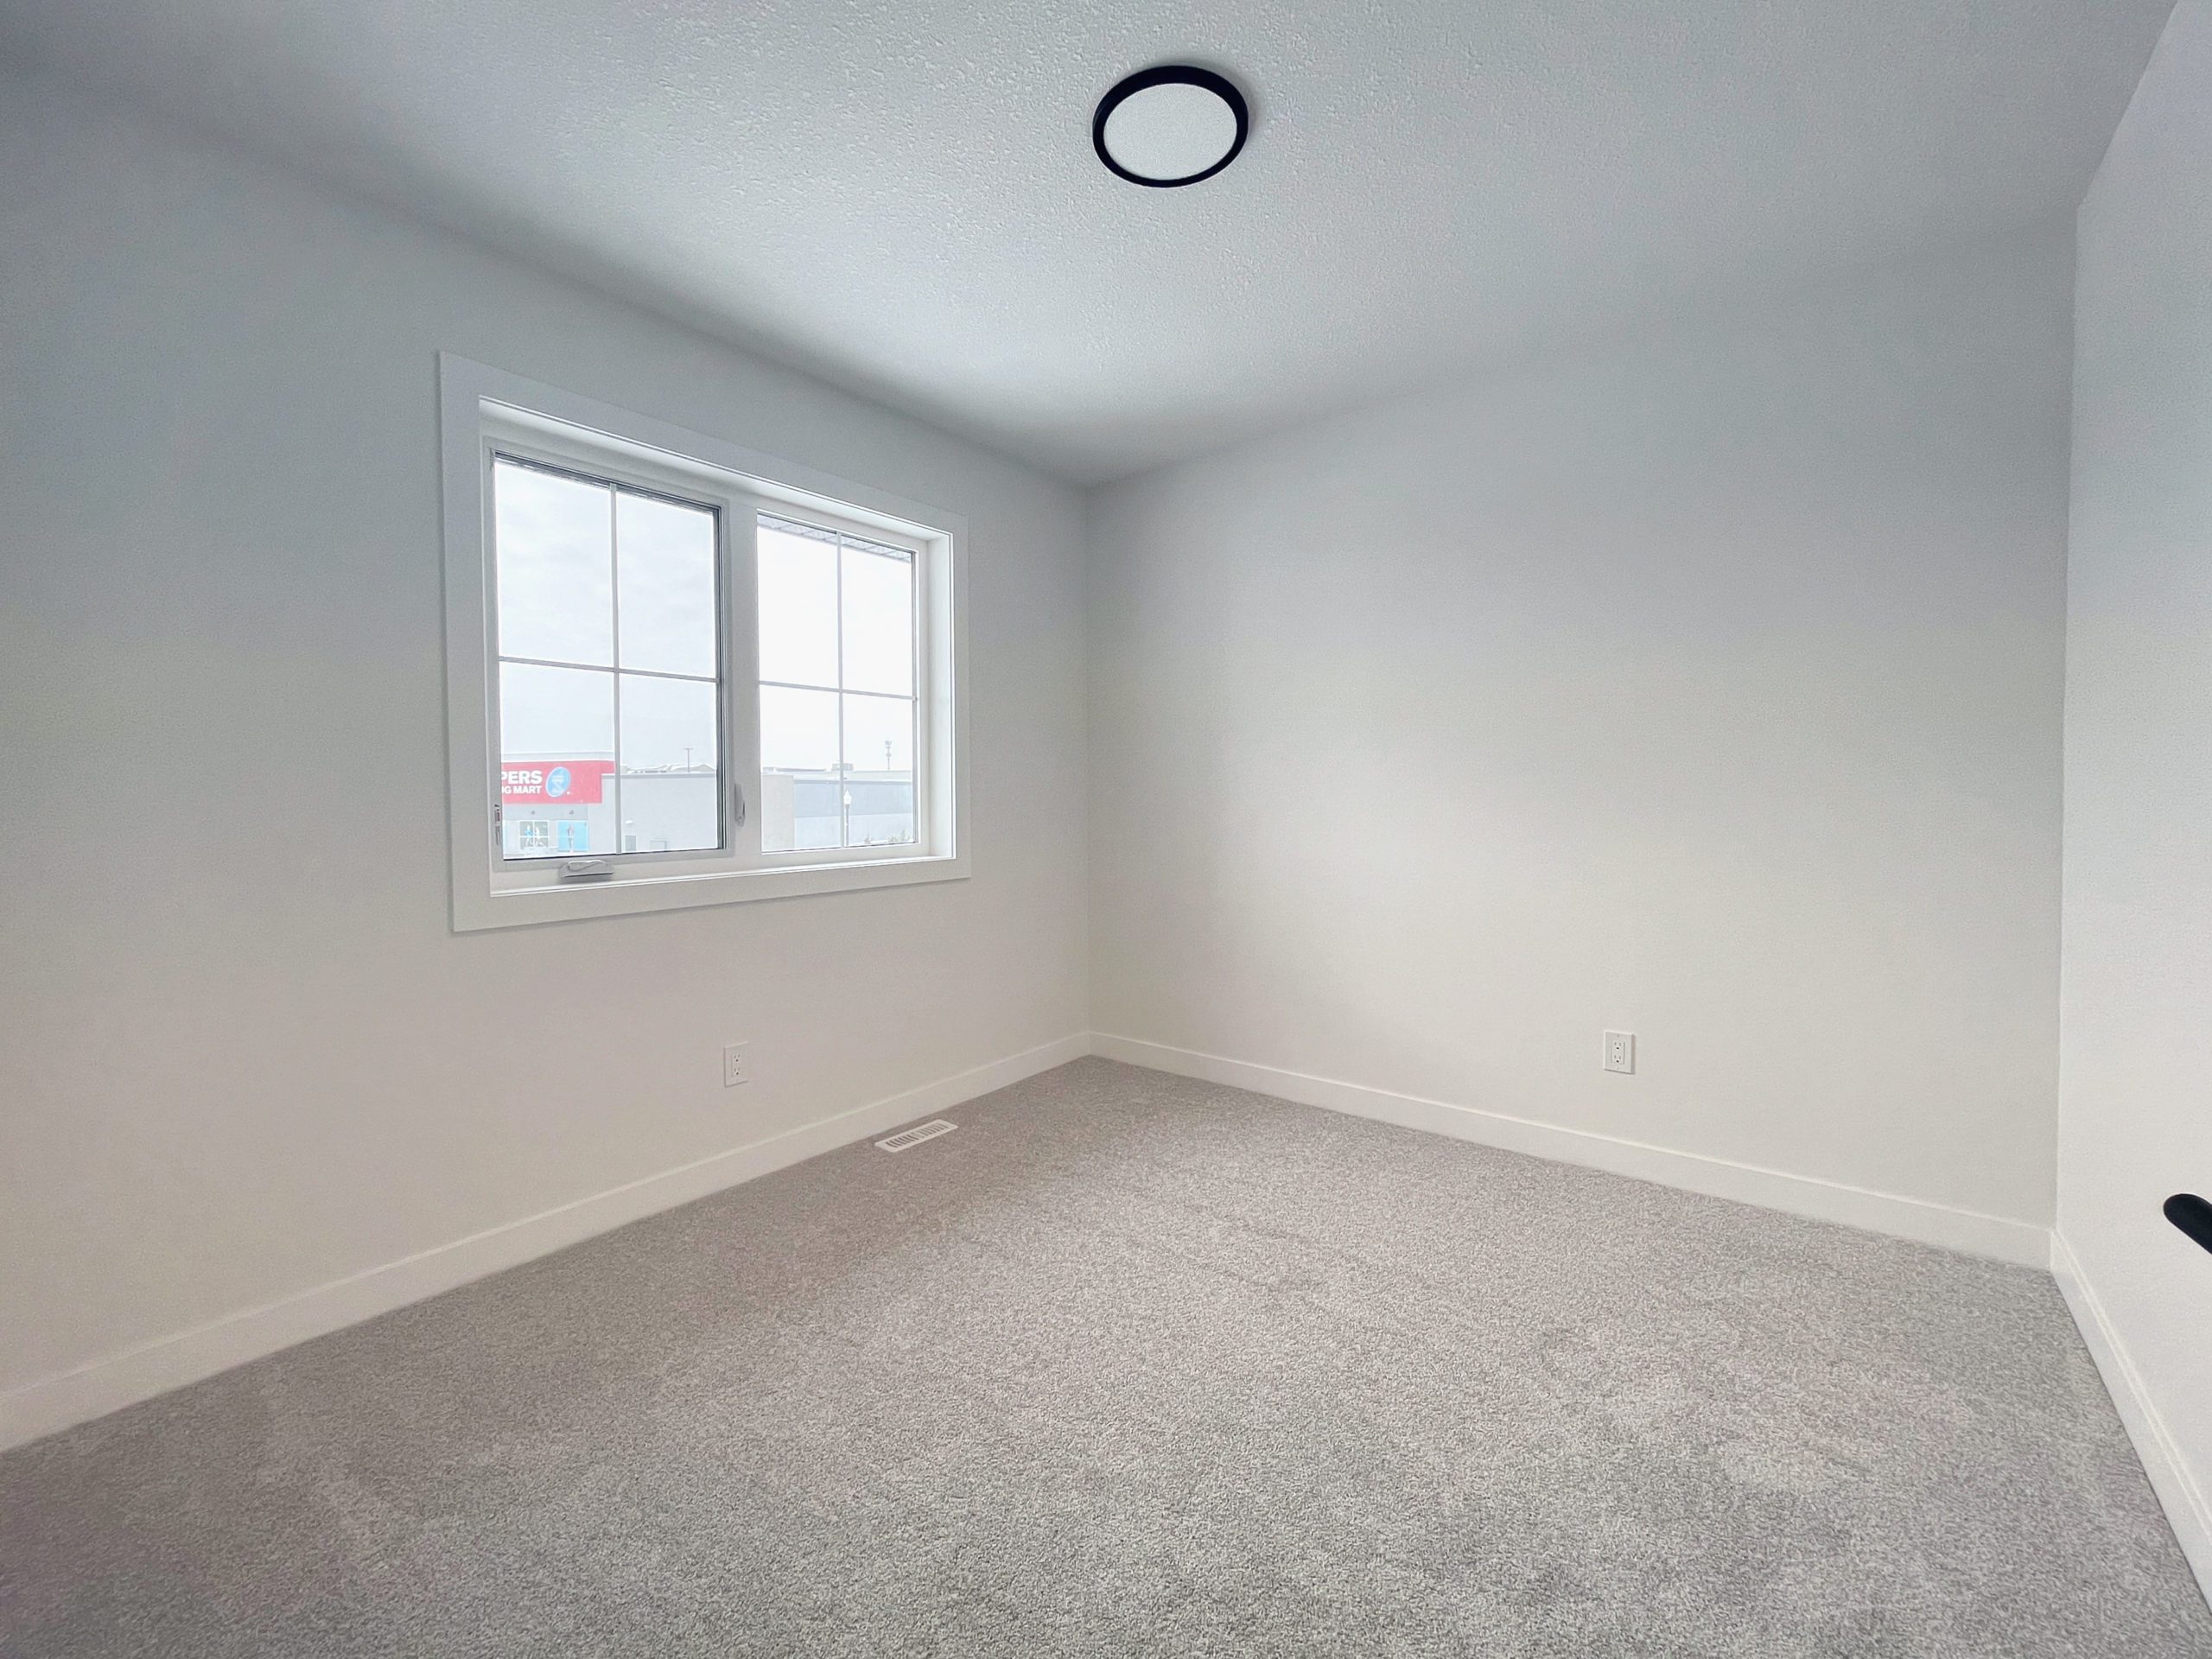 An empty bedroom with white walls and window.